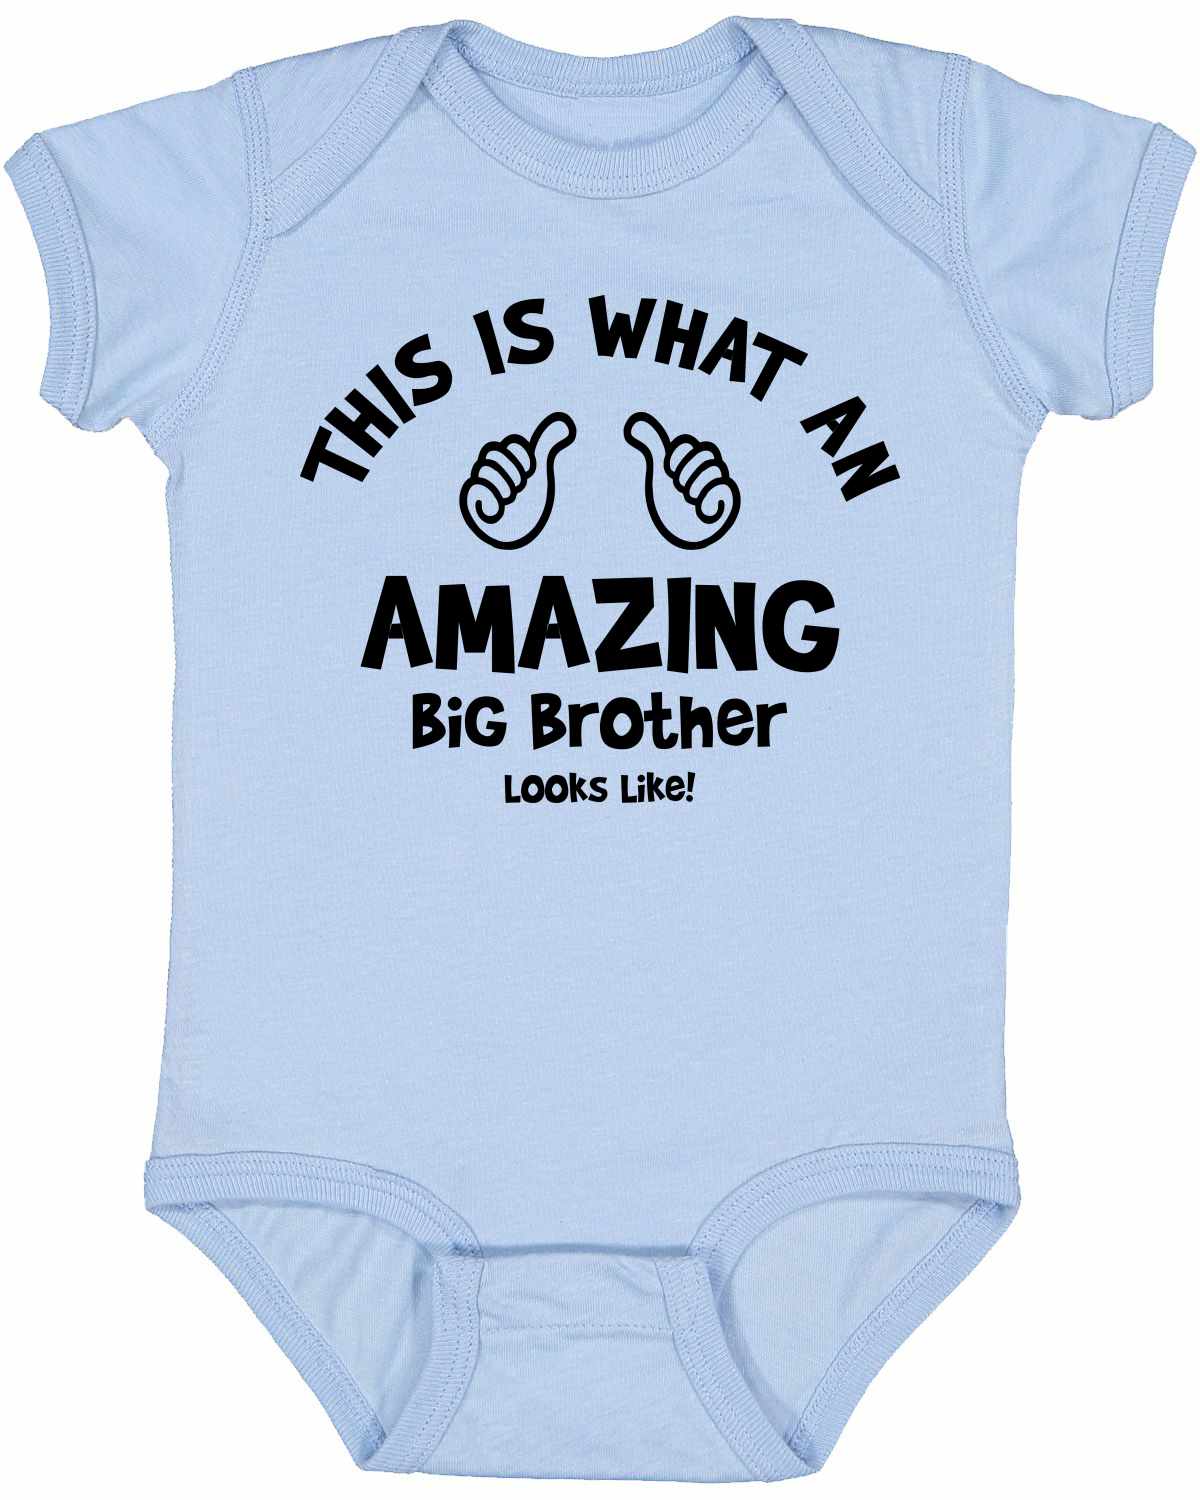 This is What an AMAZING Big Brother Looks Like Infant BodySuit